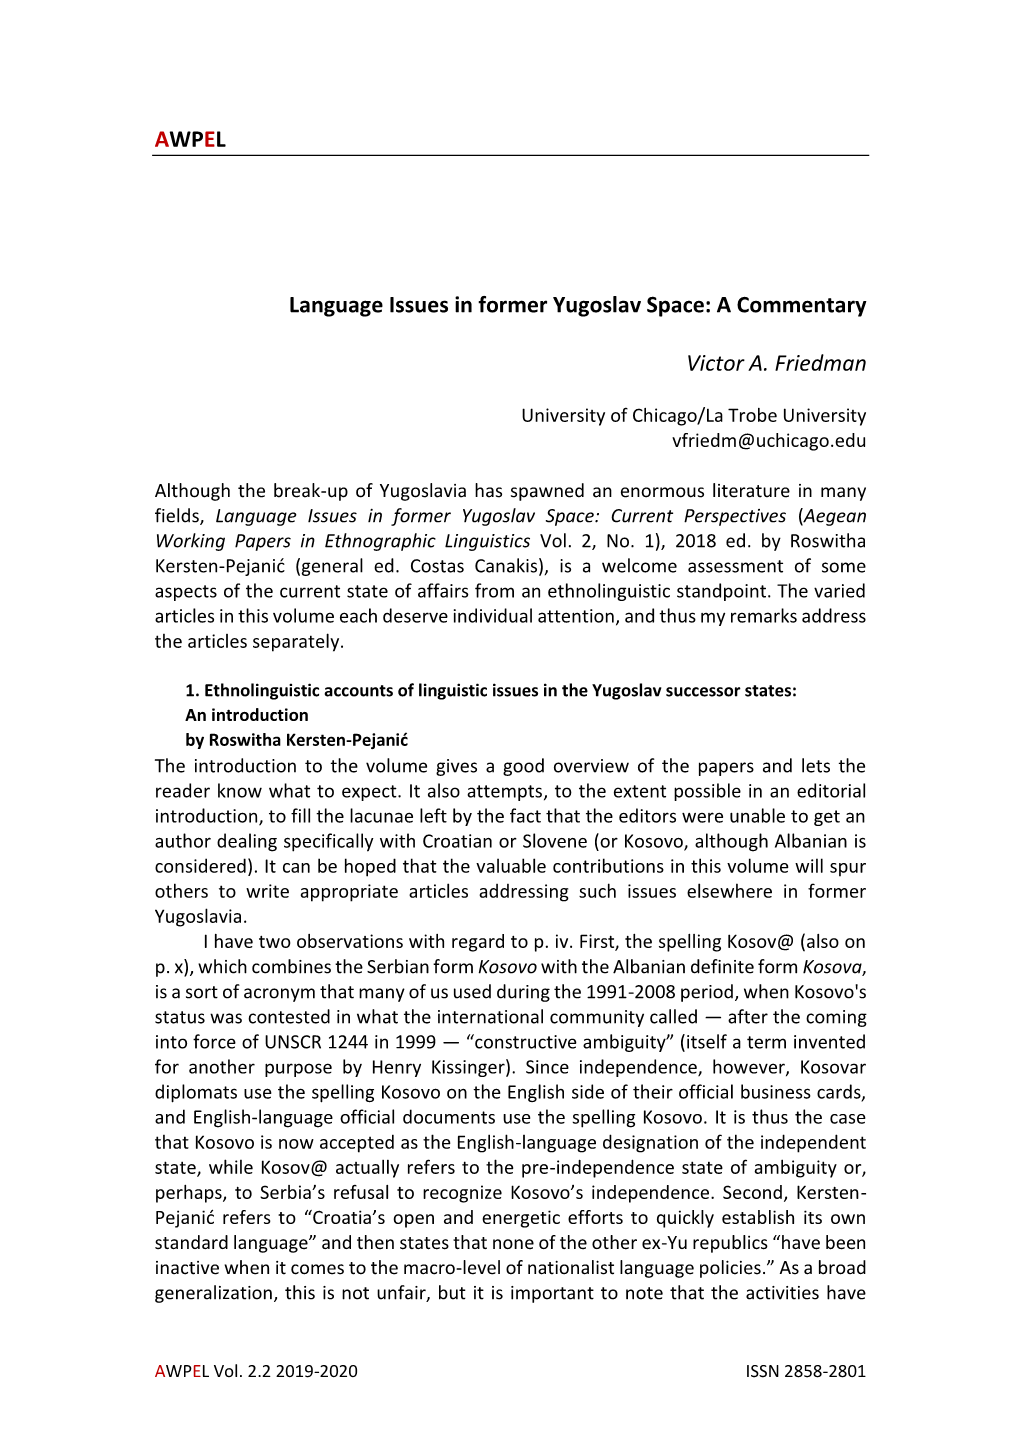 AWPEL Language Issues in Former Yugoslav Space: a Commentary